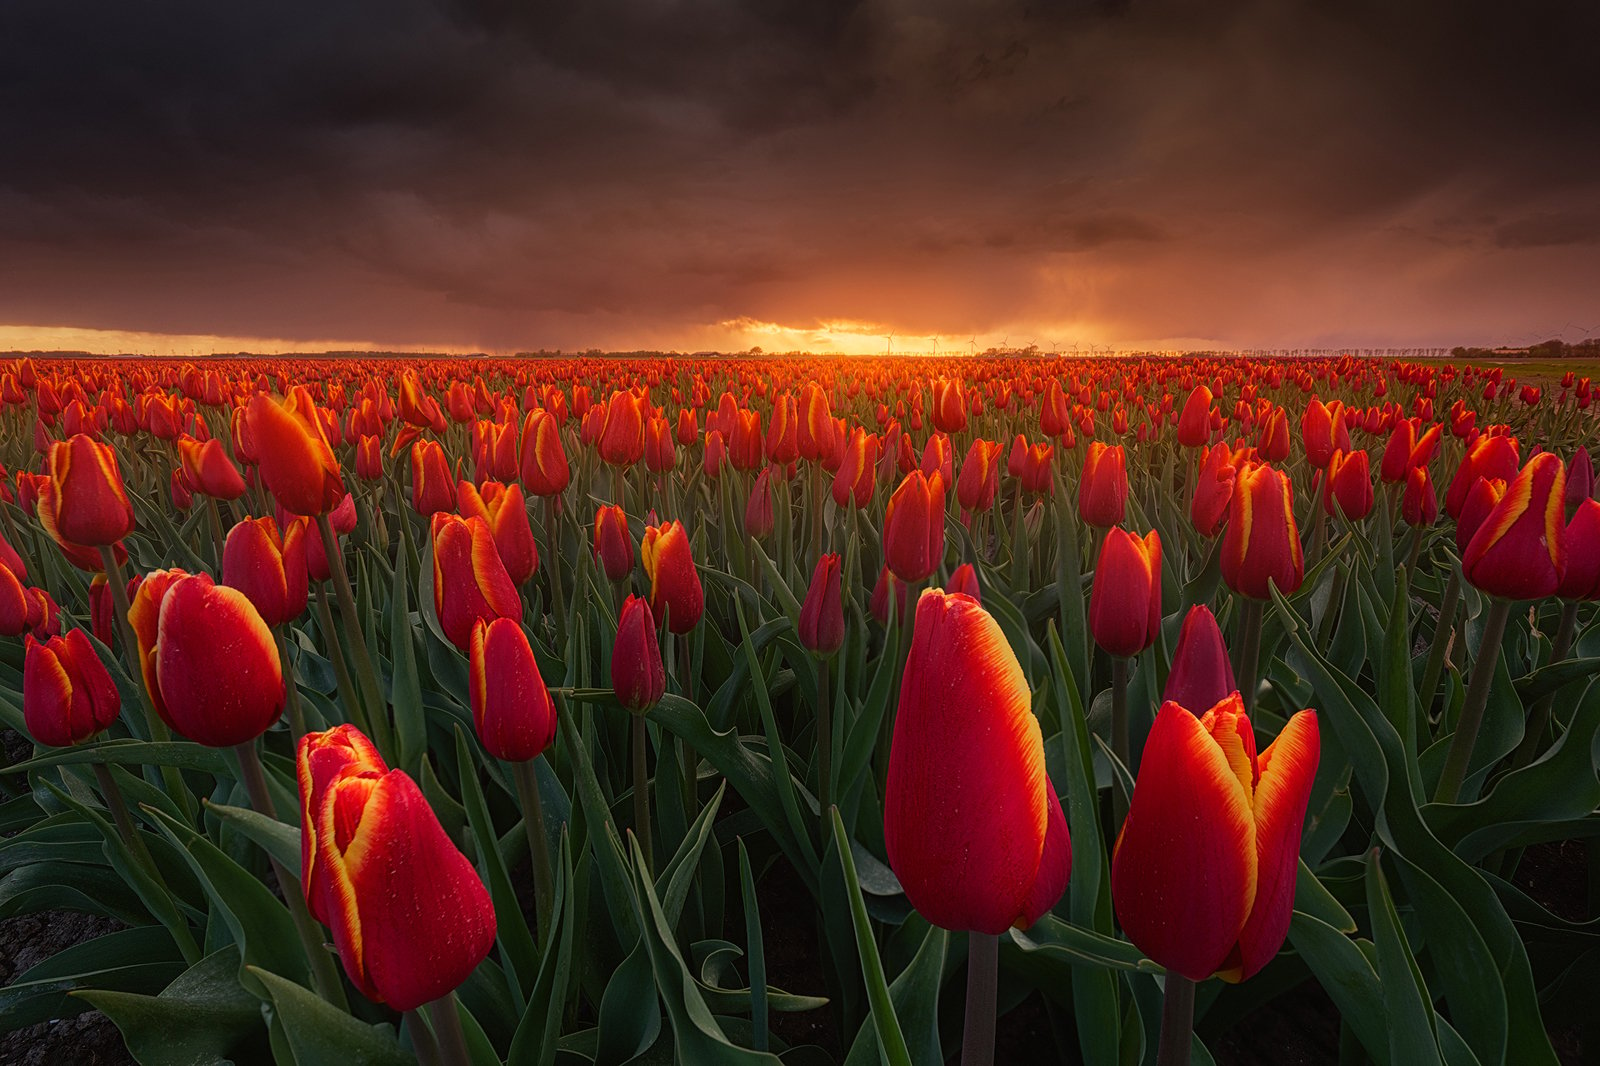 Where and How to Shoot Tulips in The Netherlands